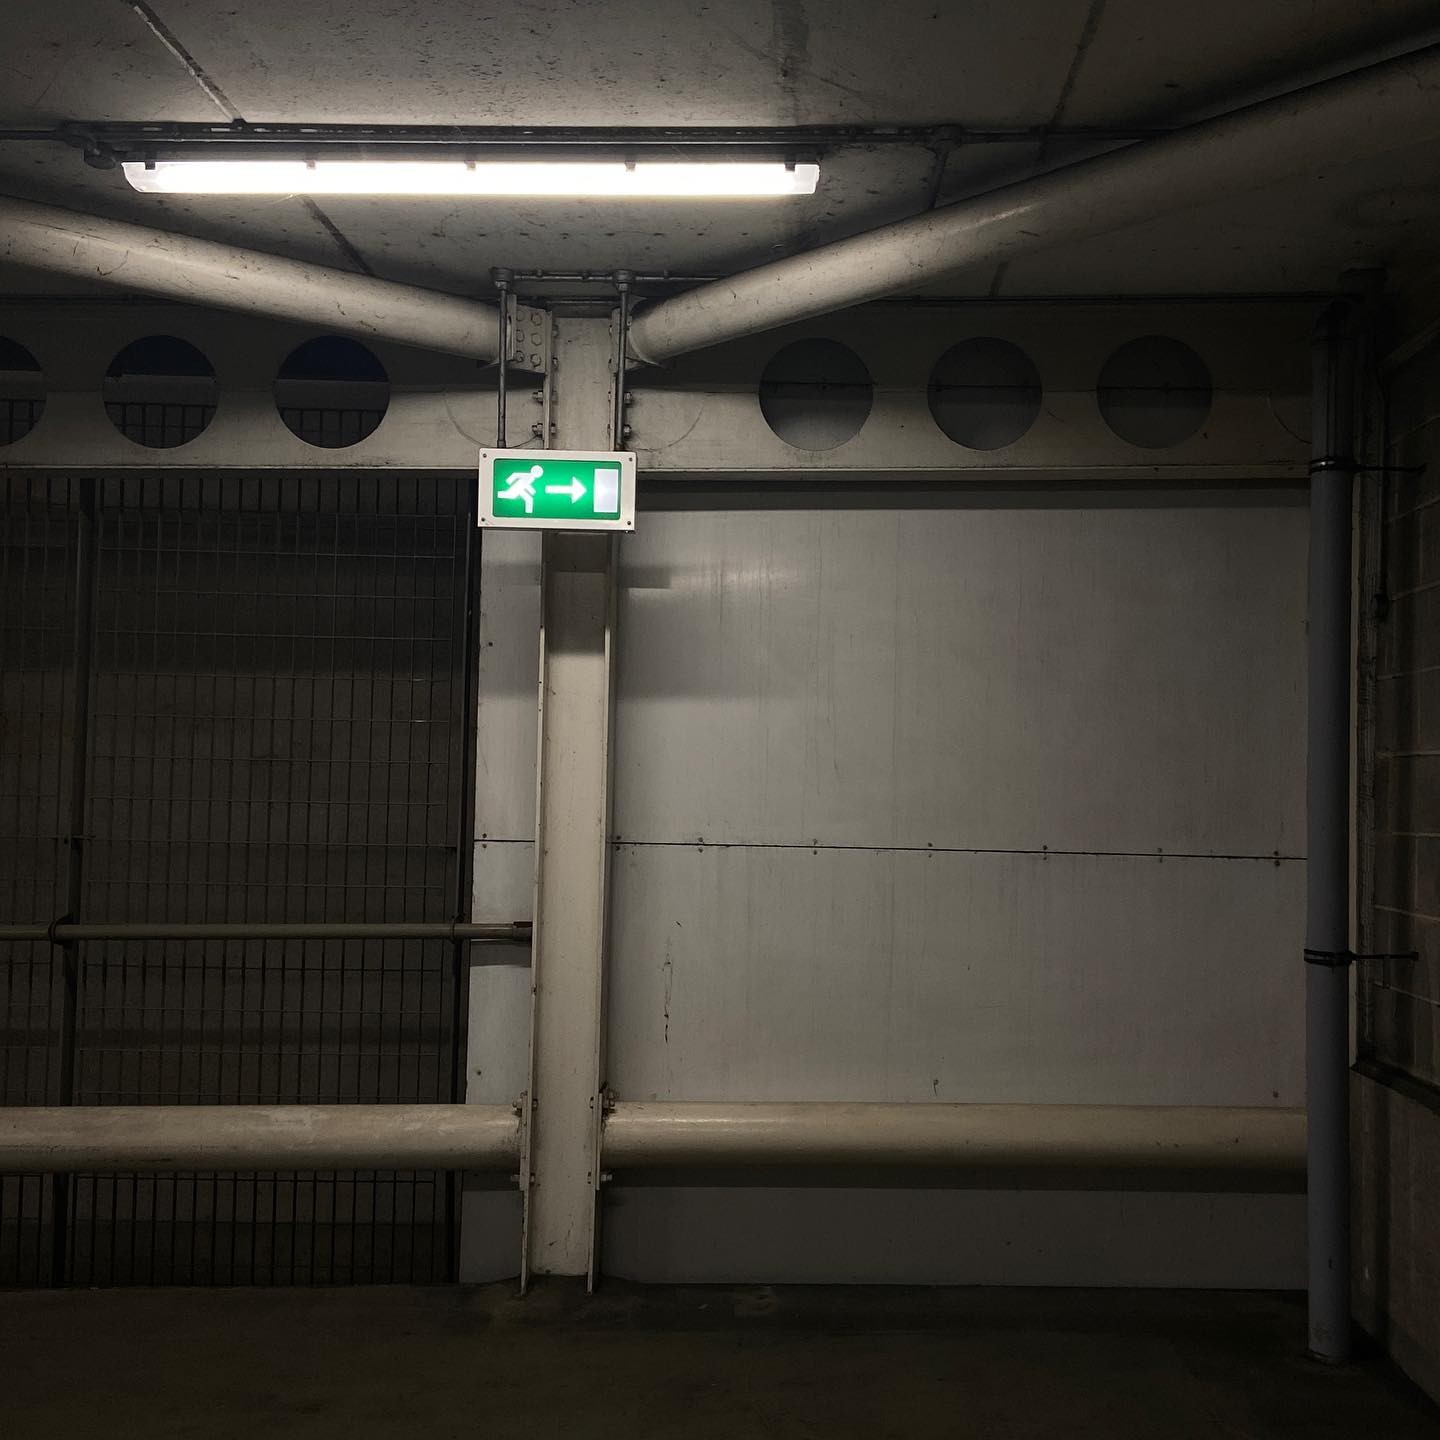 lonely fire exit sign drips from the ceiling, all metal poles and white walls. dark outside